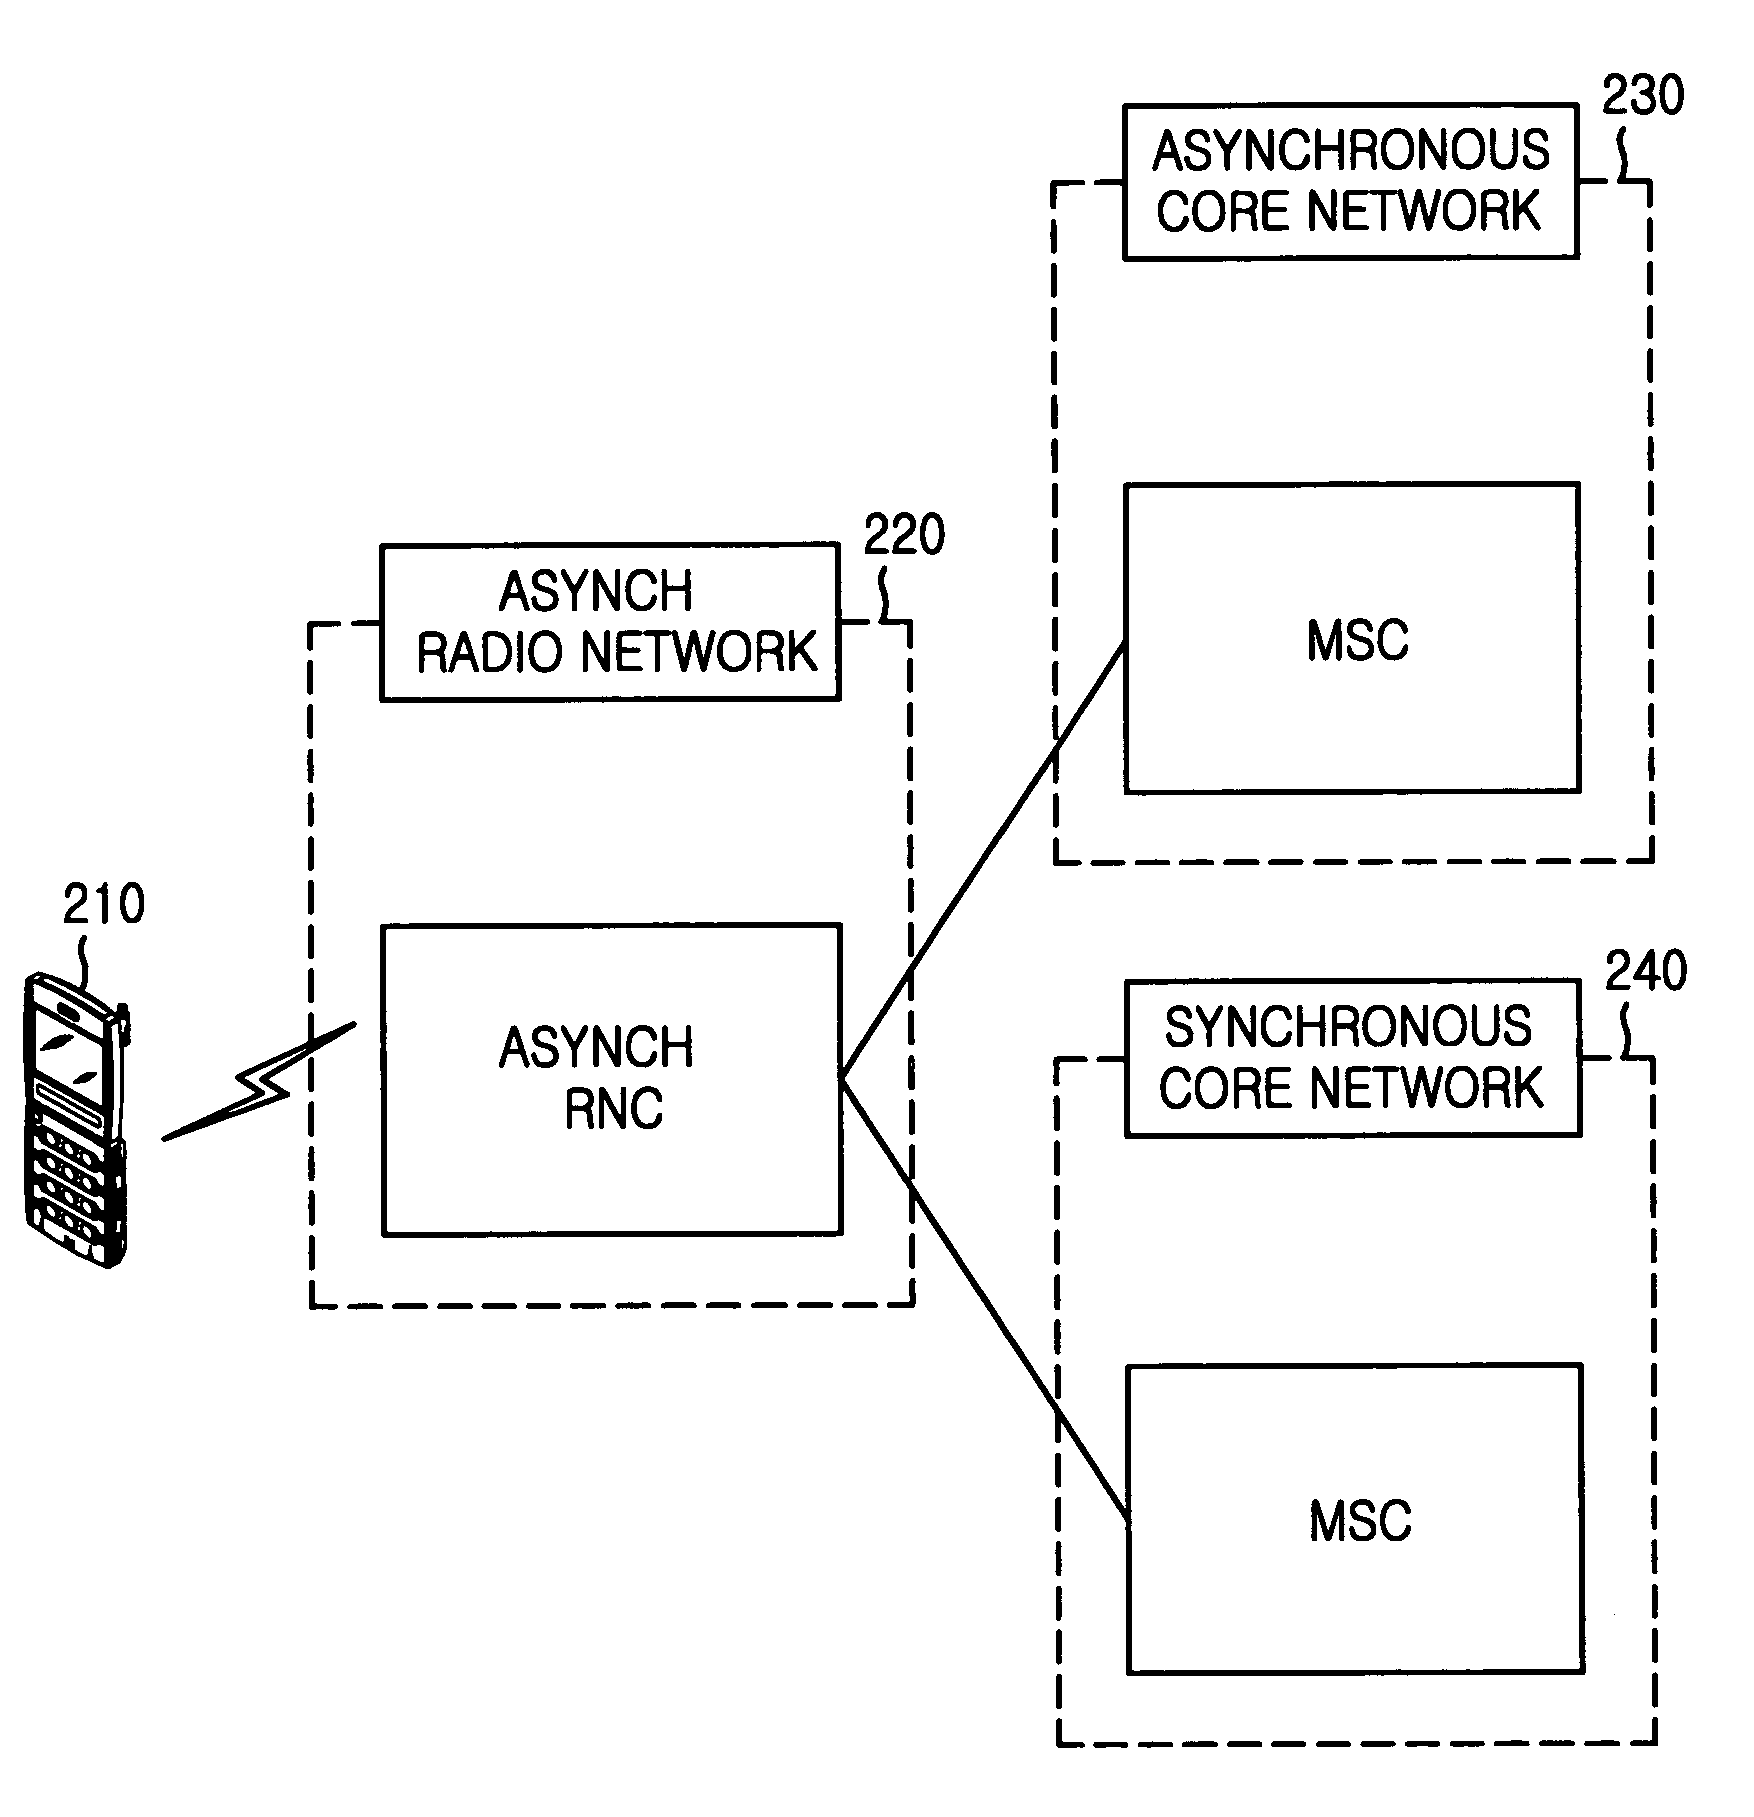 Method for interfacing asynchronous mobile communication system with at least one core network